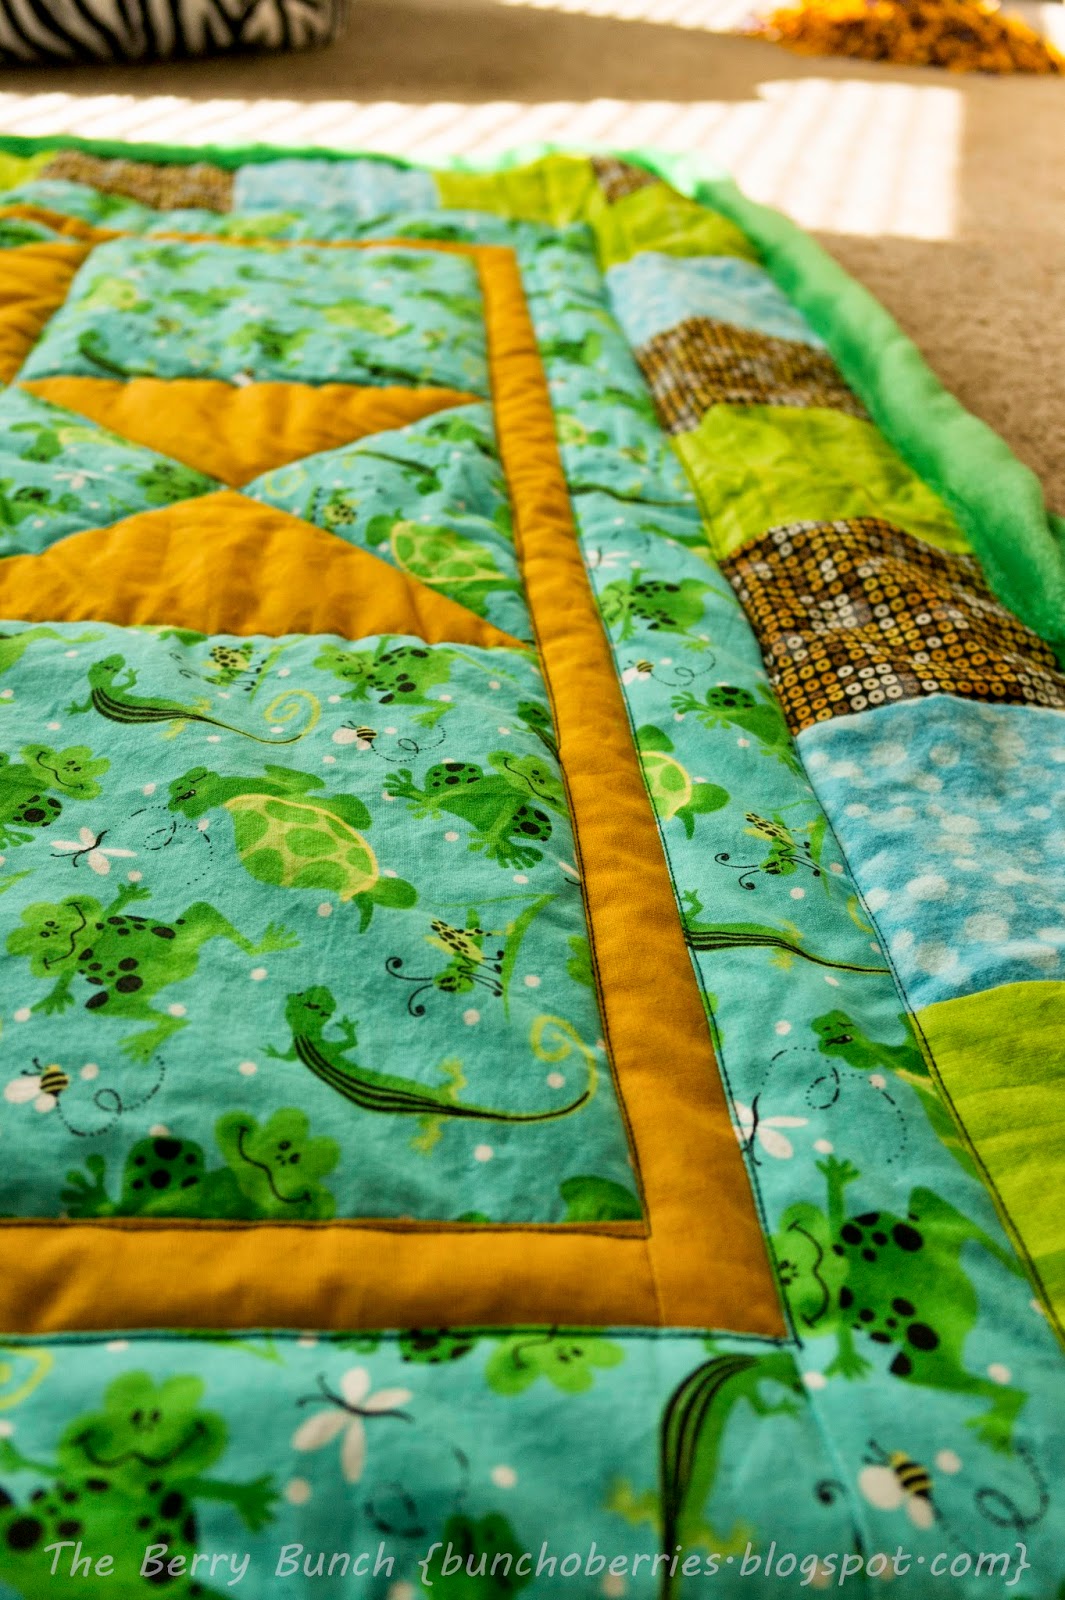 The Berry Bunch: A Baby Quilt: A Gift for a Childhood Friend {Storybook Quilt}